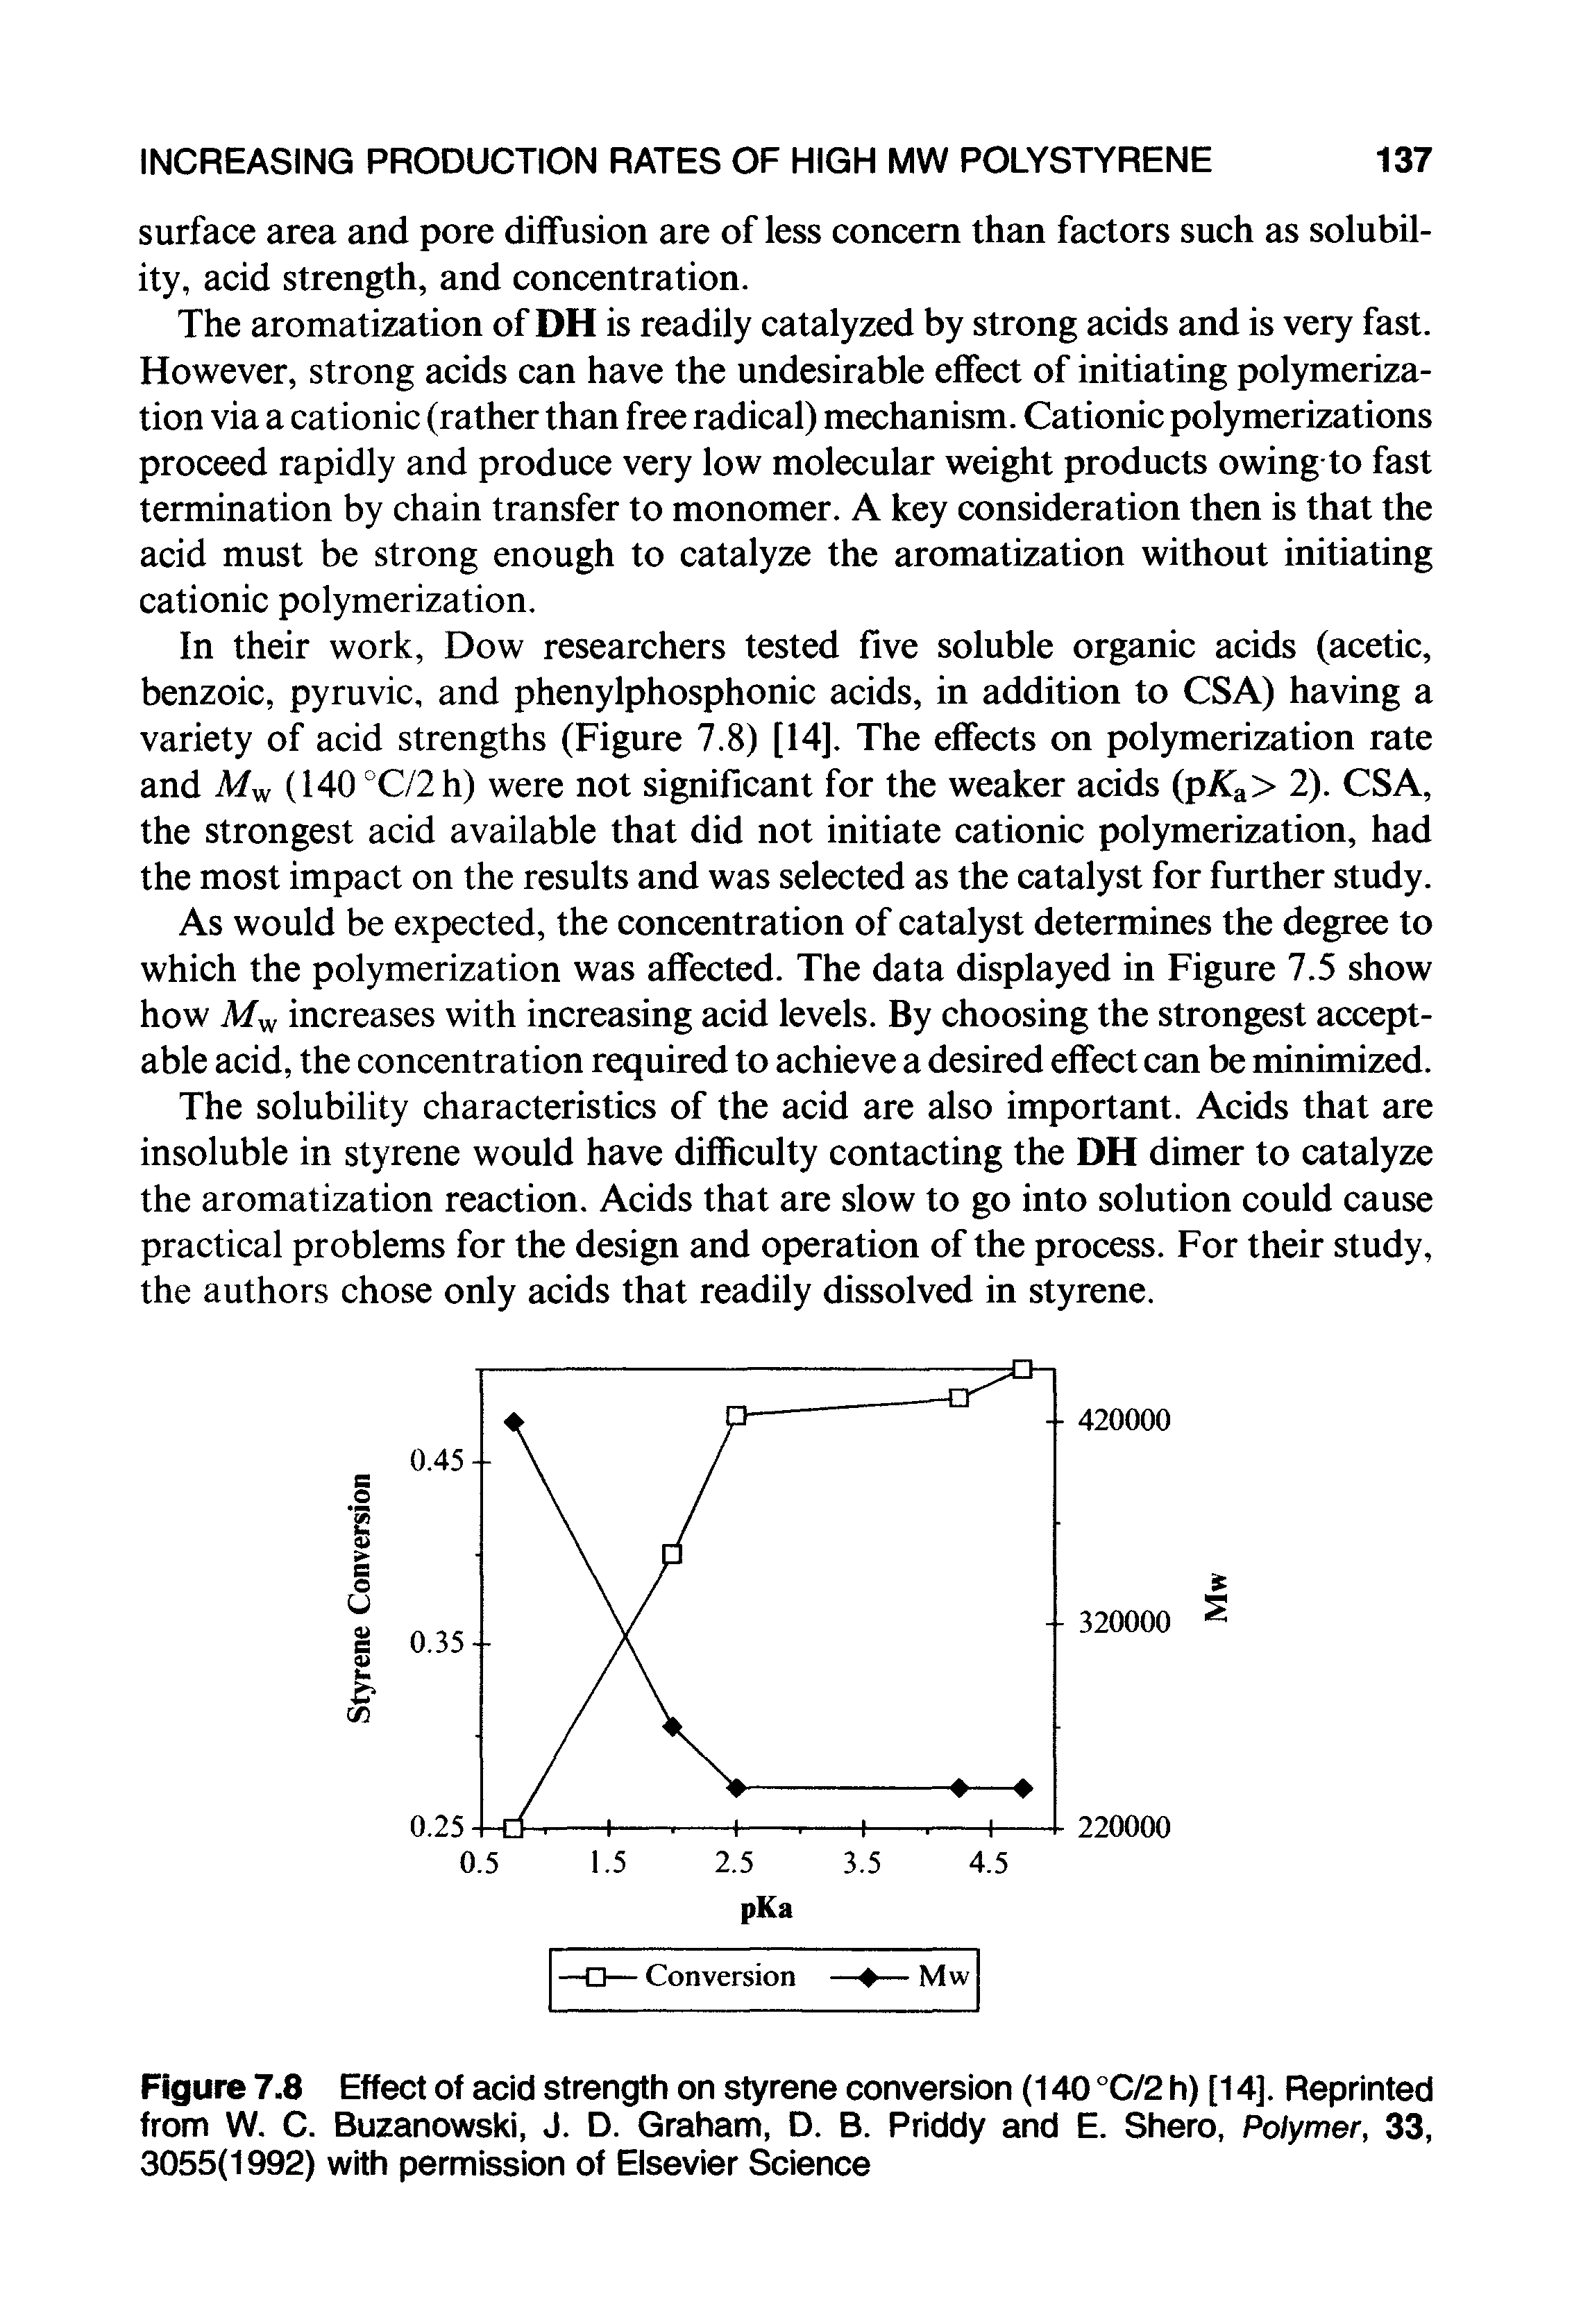 Figure 7.8 Effect of acid strength on styrene conversion (140 °C/2 h) [14]. Reprinted from W. C. Buzanowski, J. D. Graham, D. B. Priddy and E. Shero, Polymer, 33, 3055(1992) with permission of Elsevier Science...